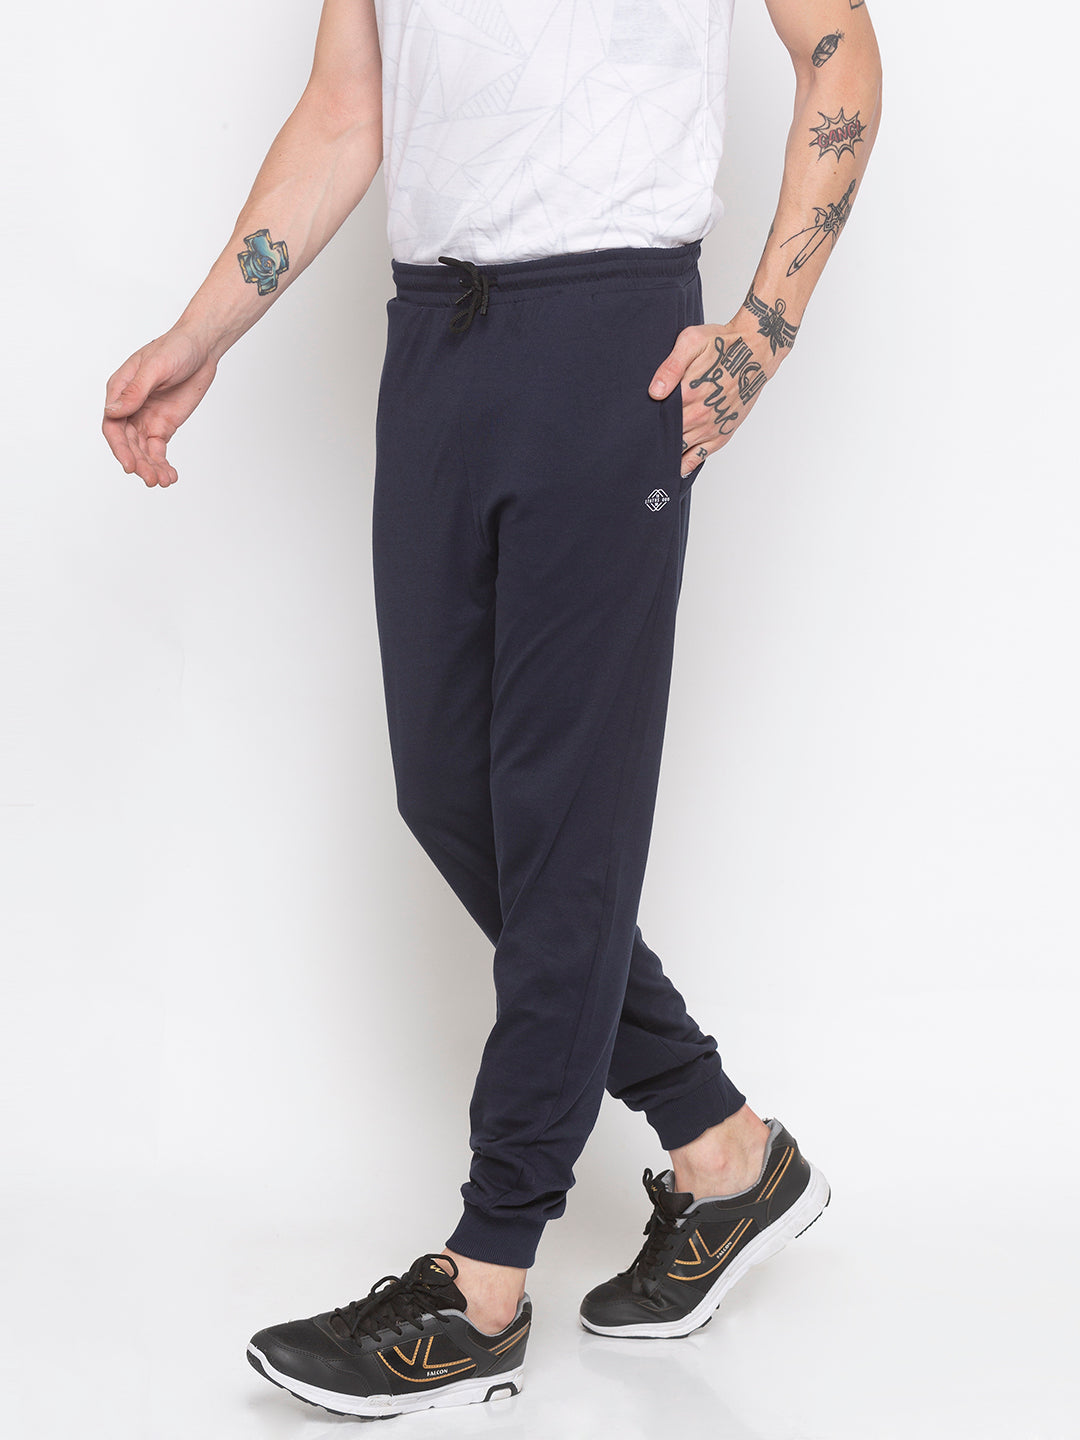 Mens Joggers  Buy Joggers for Men Online at Best Prices in India  RR  Sportswear